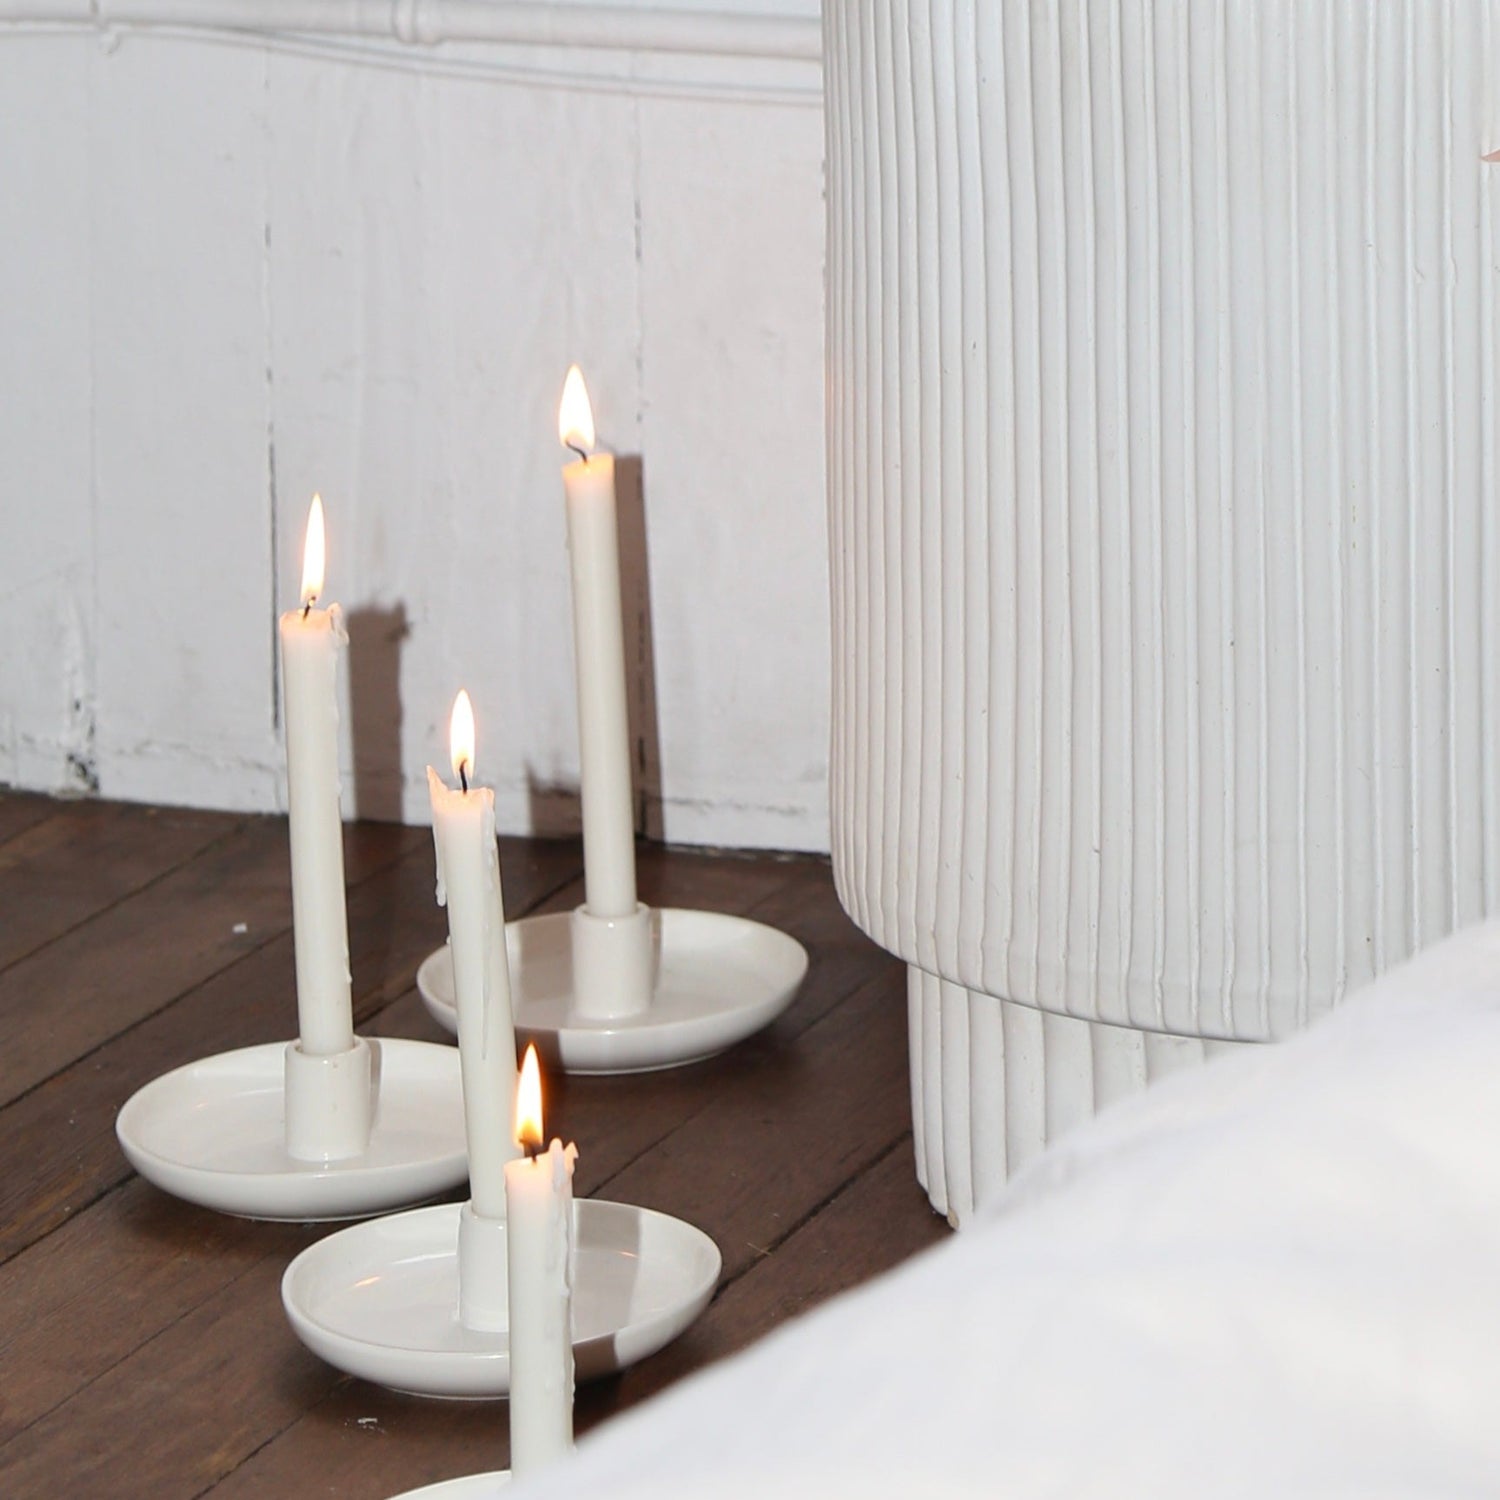 Ceramic taper candle holder in glossy white available at Rook & Rose.